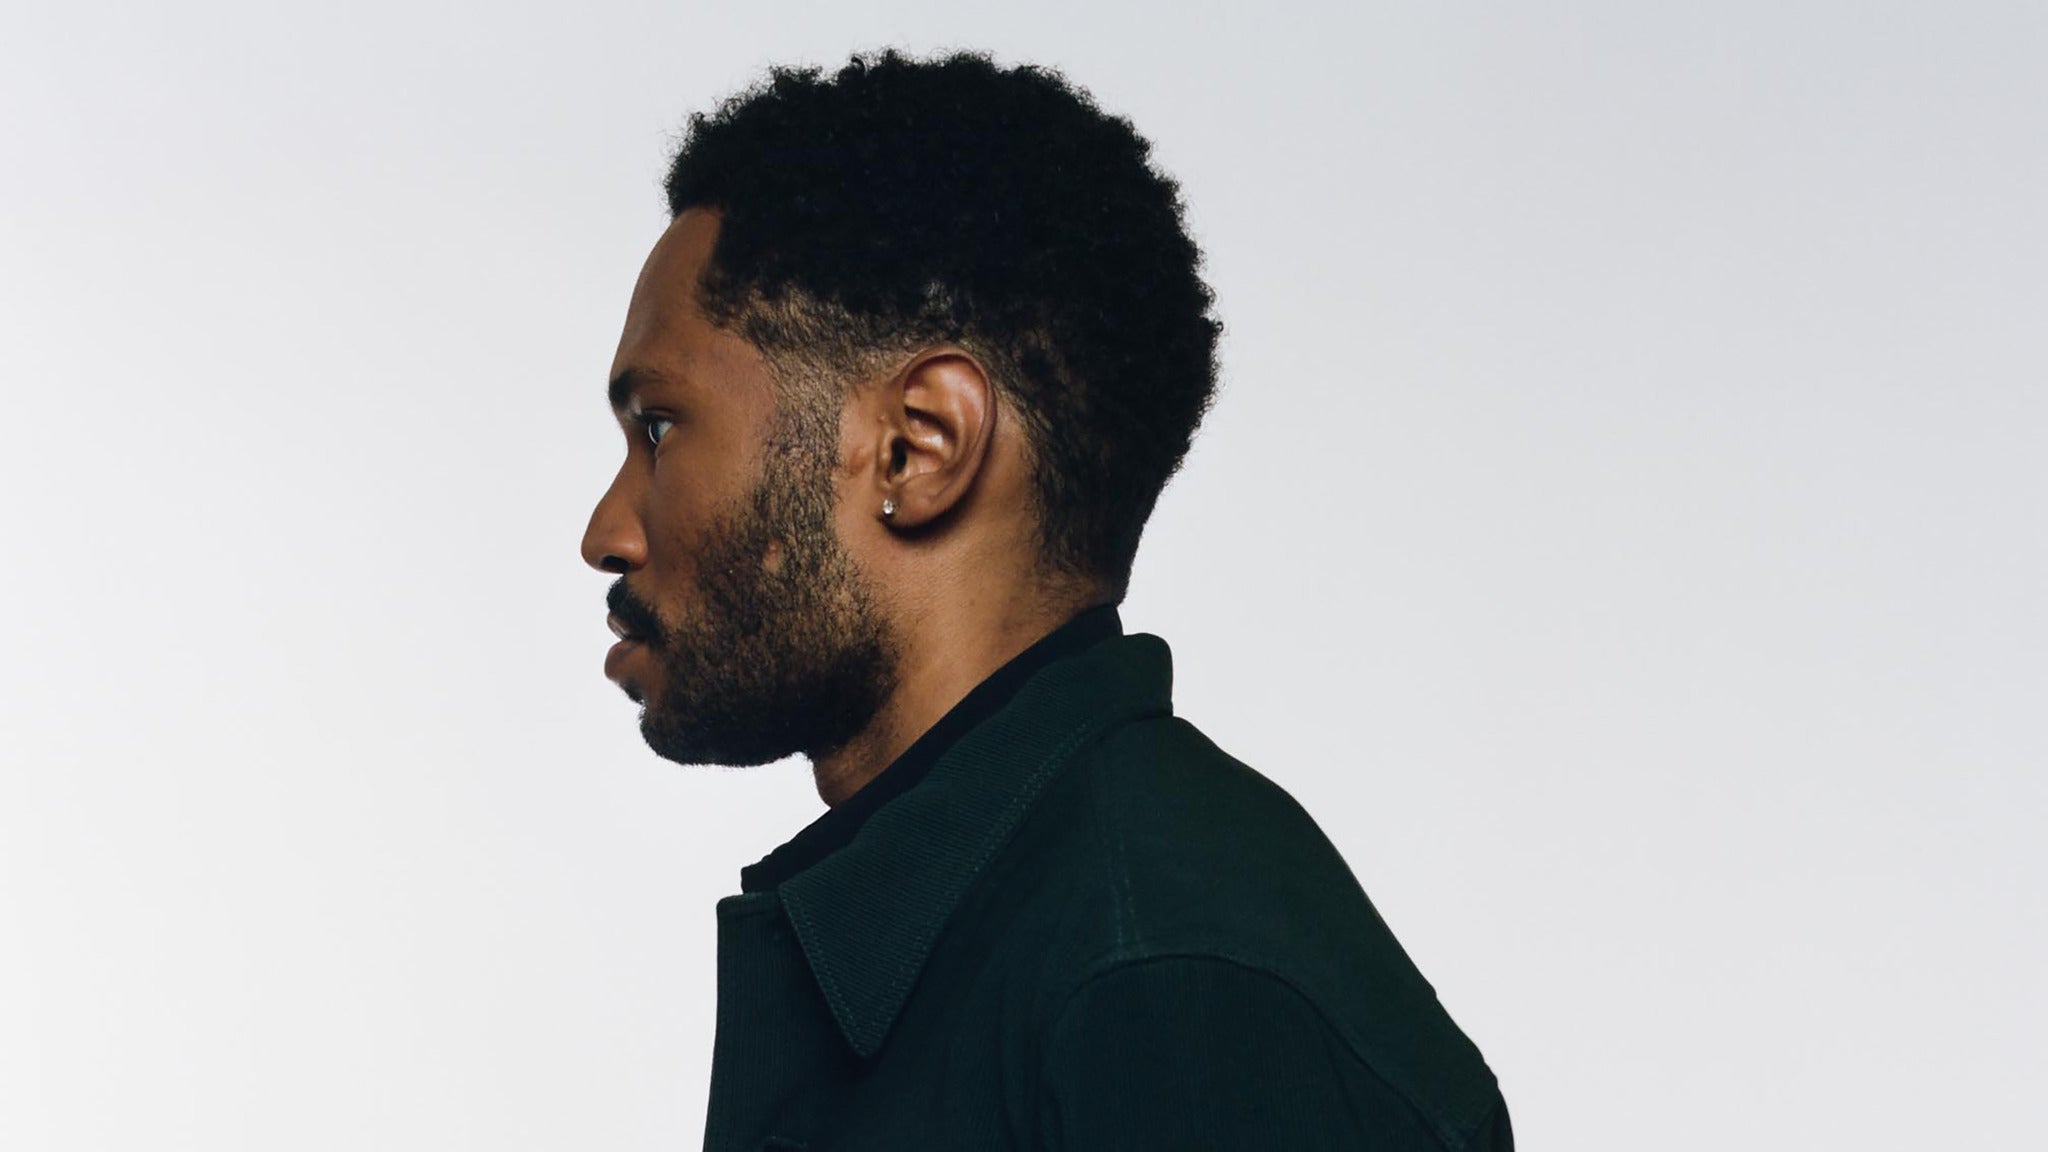 Image used with permission from Ticketmaster | Igloofest - Kaytranada tickets